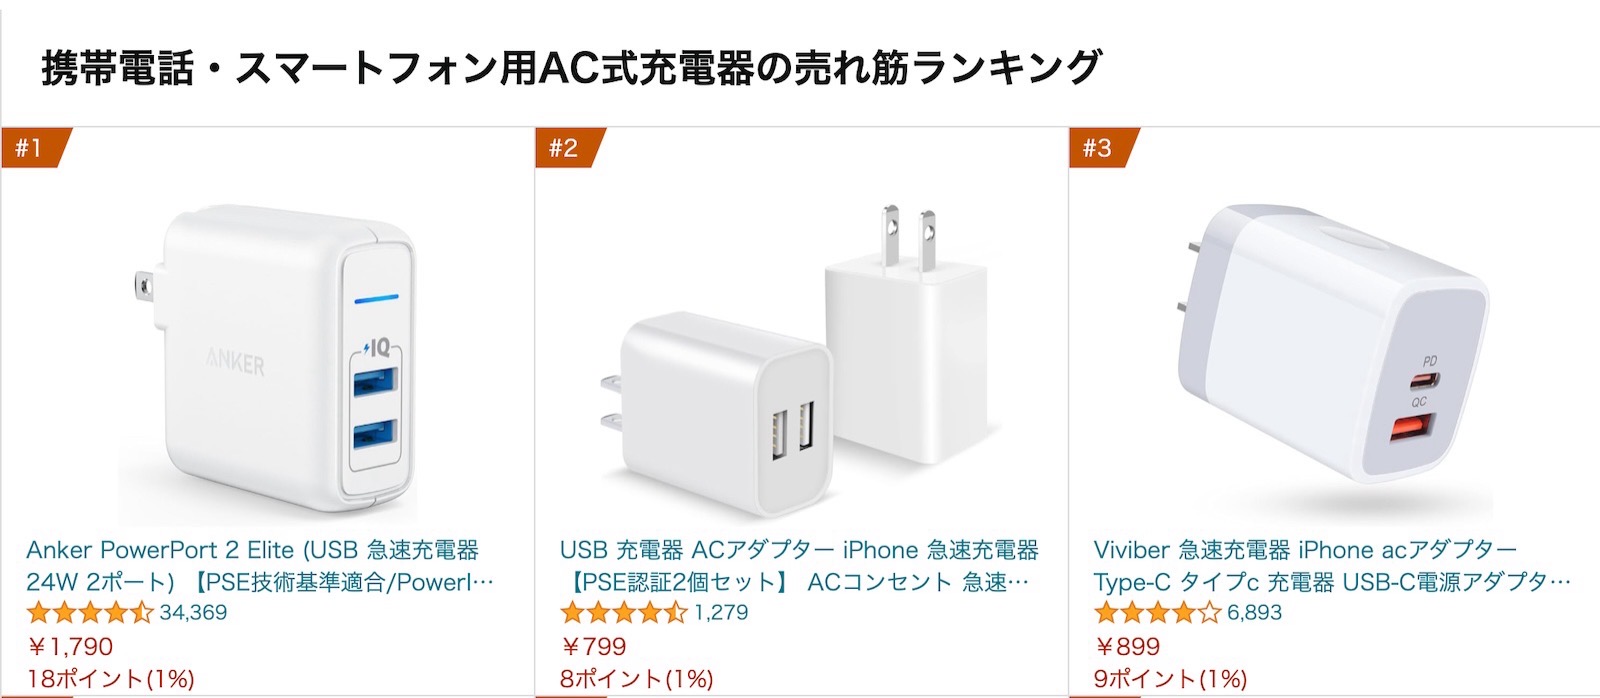 USB charger ranking